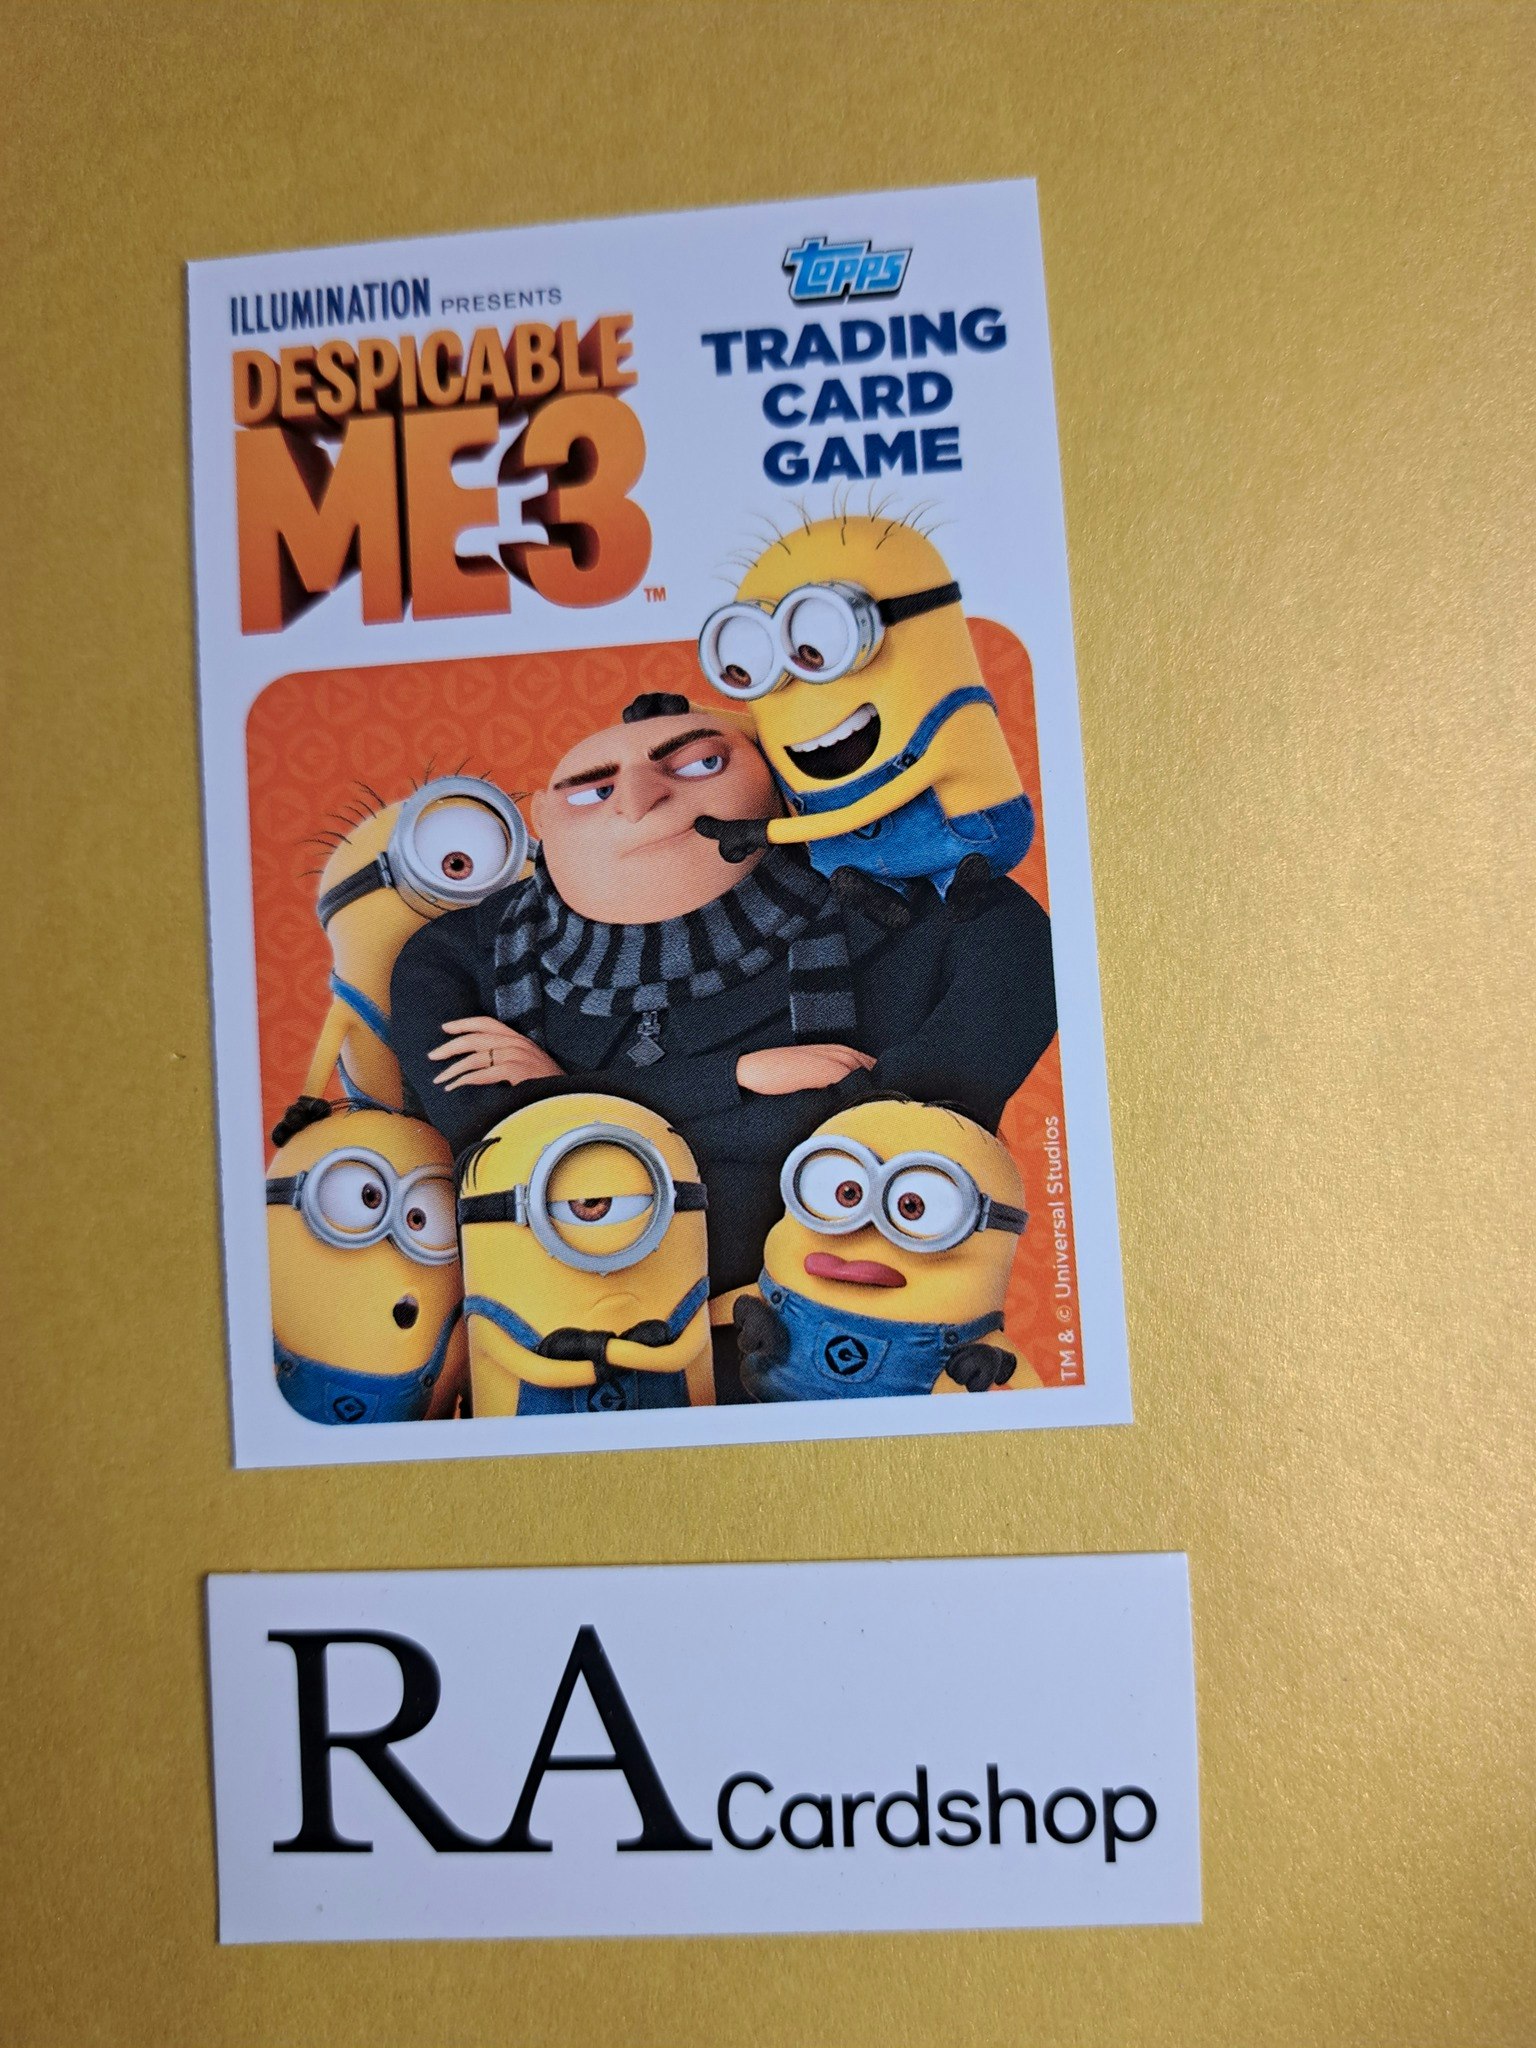 Lucky The Goat (1) #Limited Edition Despicable Me 3 Topps